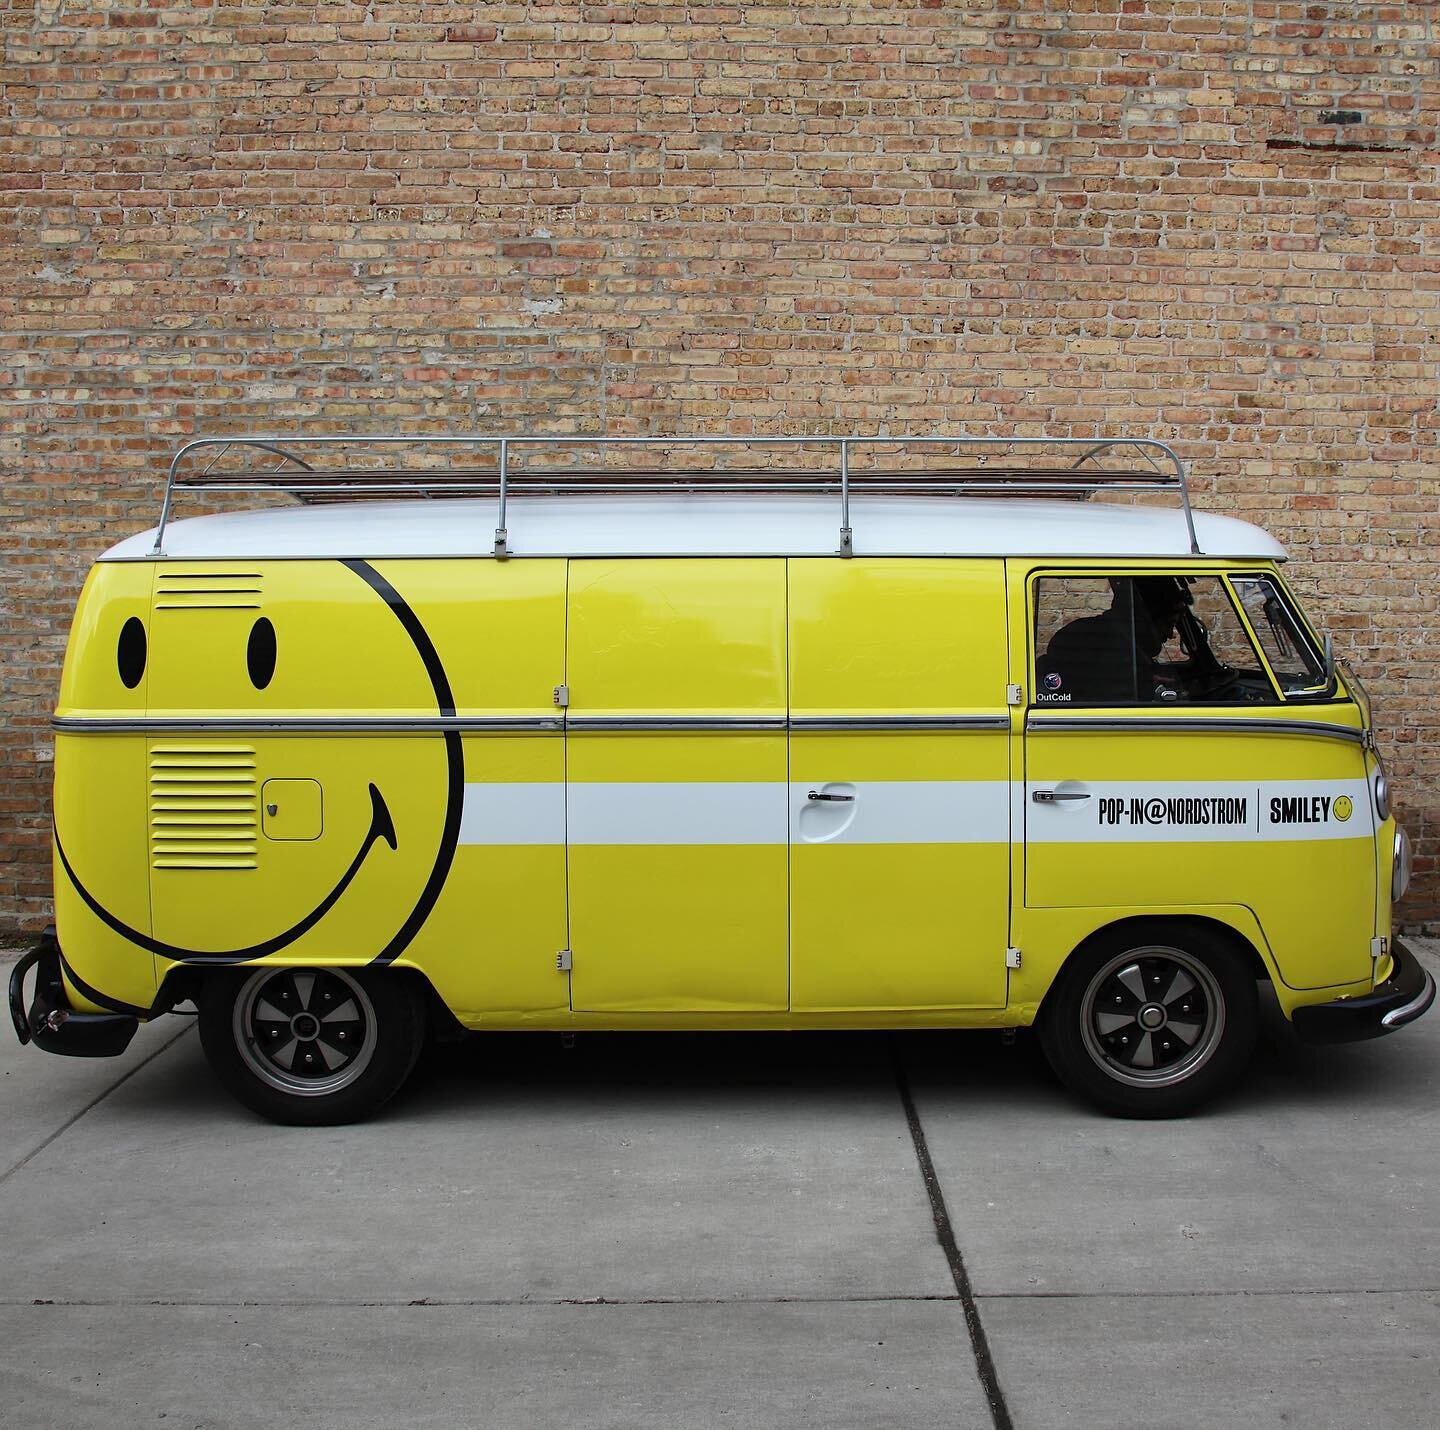 Now this is something to smile about: our VW bus is hitting the road again! We&rsquo;ll be popping up throughout NYC to celebrate the Smiley Pop-In at @nordstromnyc and spread some happiness. 😄 See if you can catch the bus in action &amp; grab some 